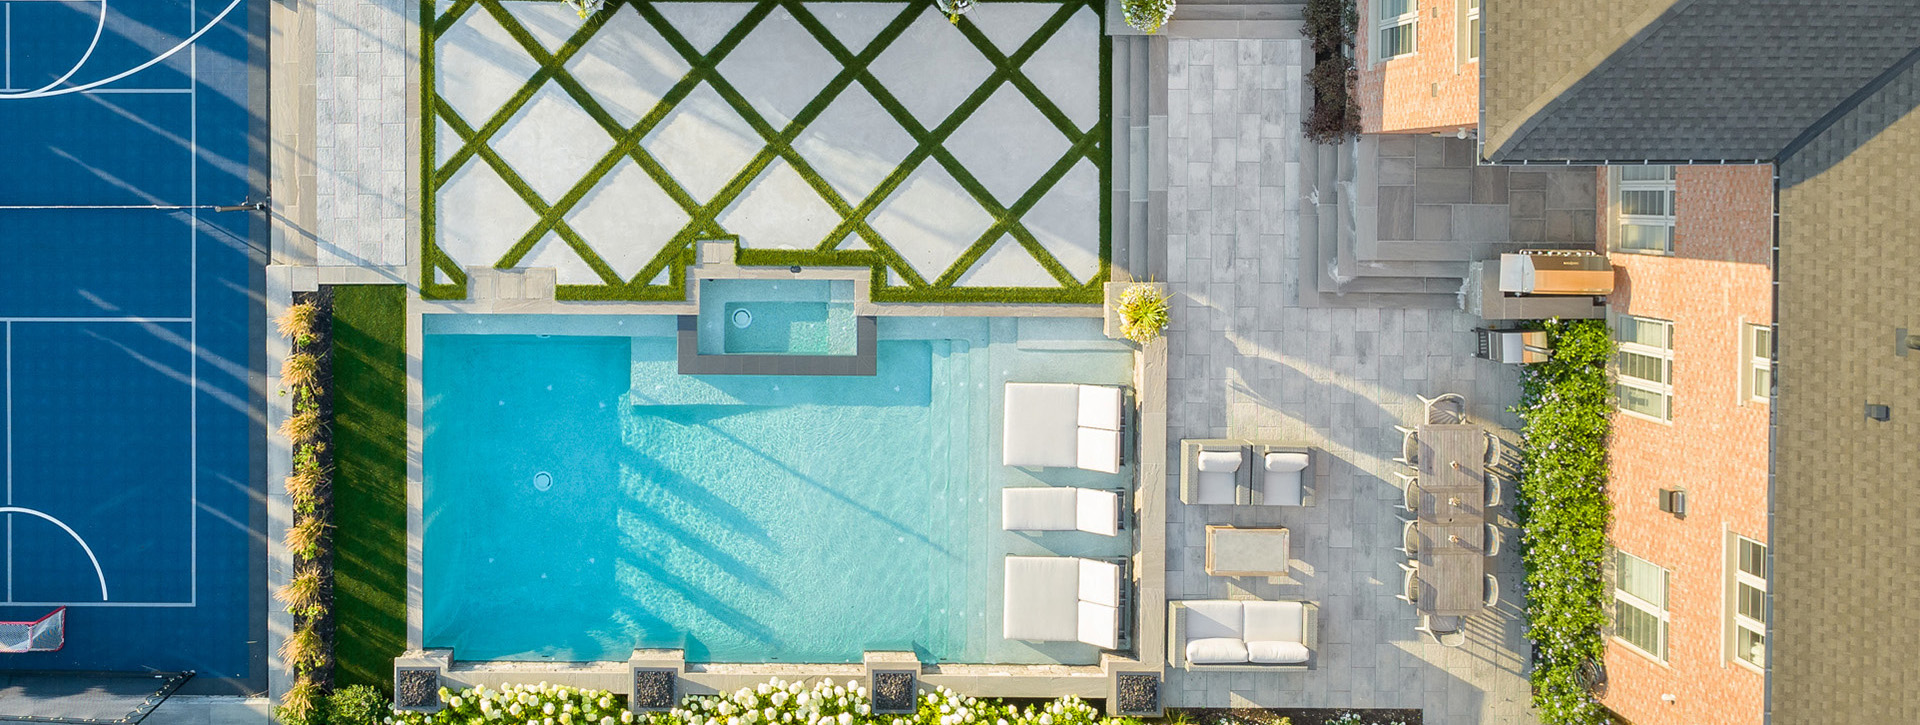 Aerial view of a luxurious backyard with a large swimming pool, an adjacent tennis court, lounging chairs, manicured hedges, and a part of a house.